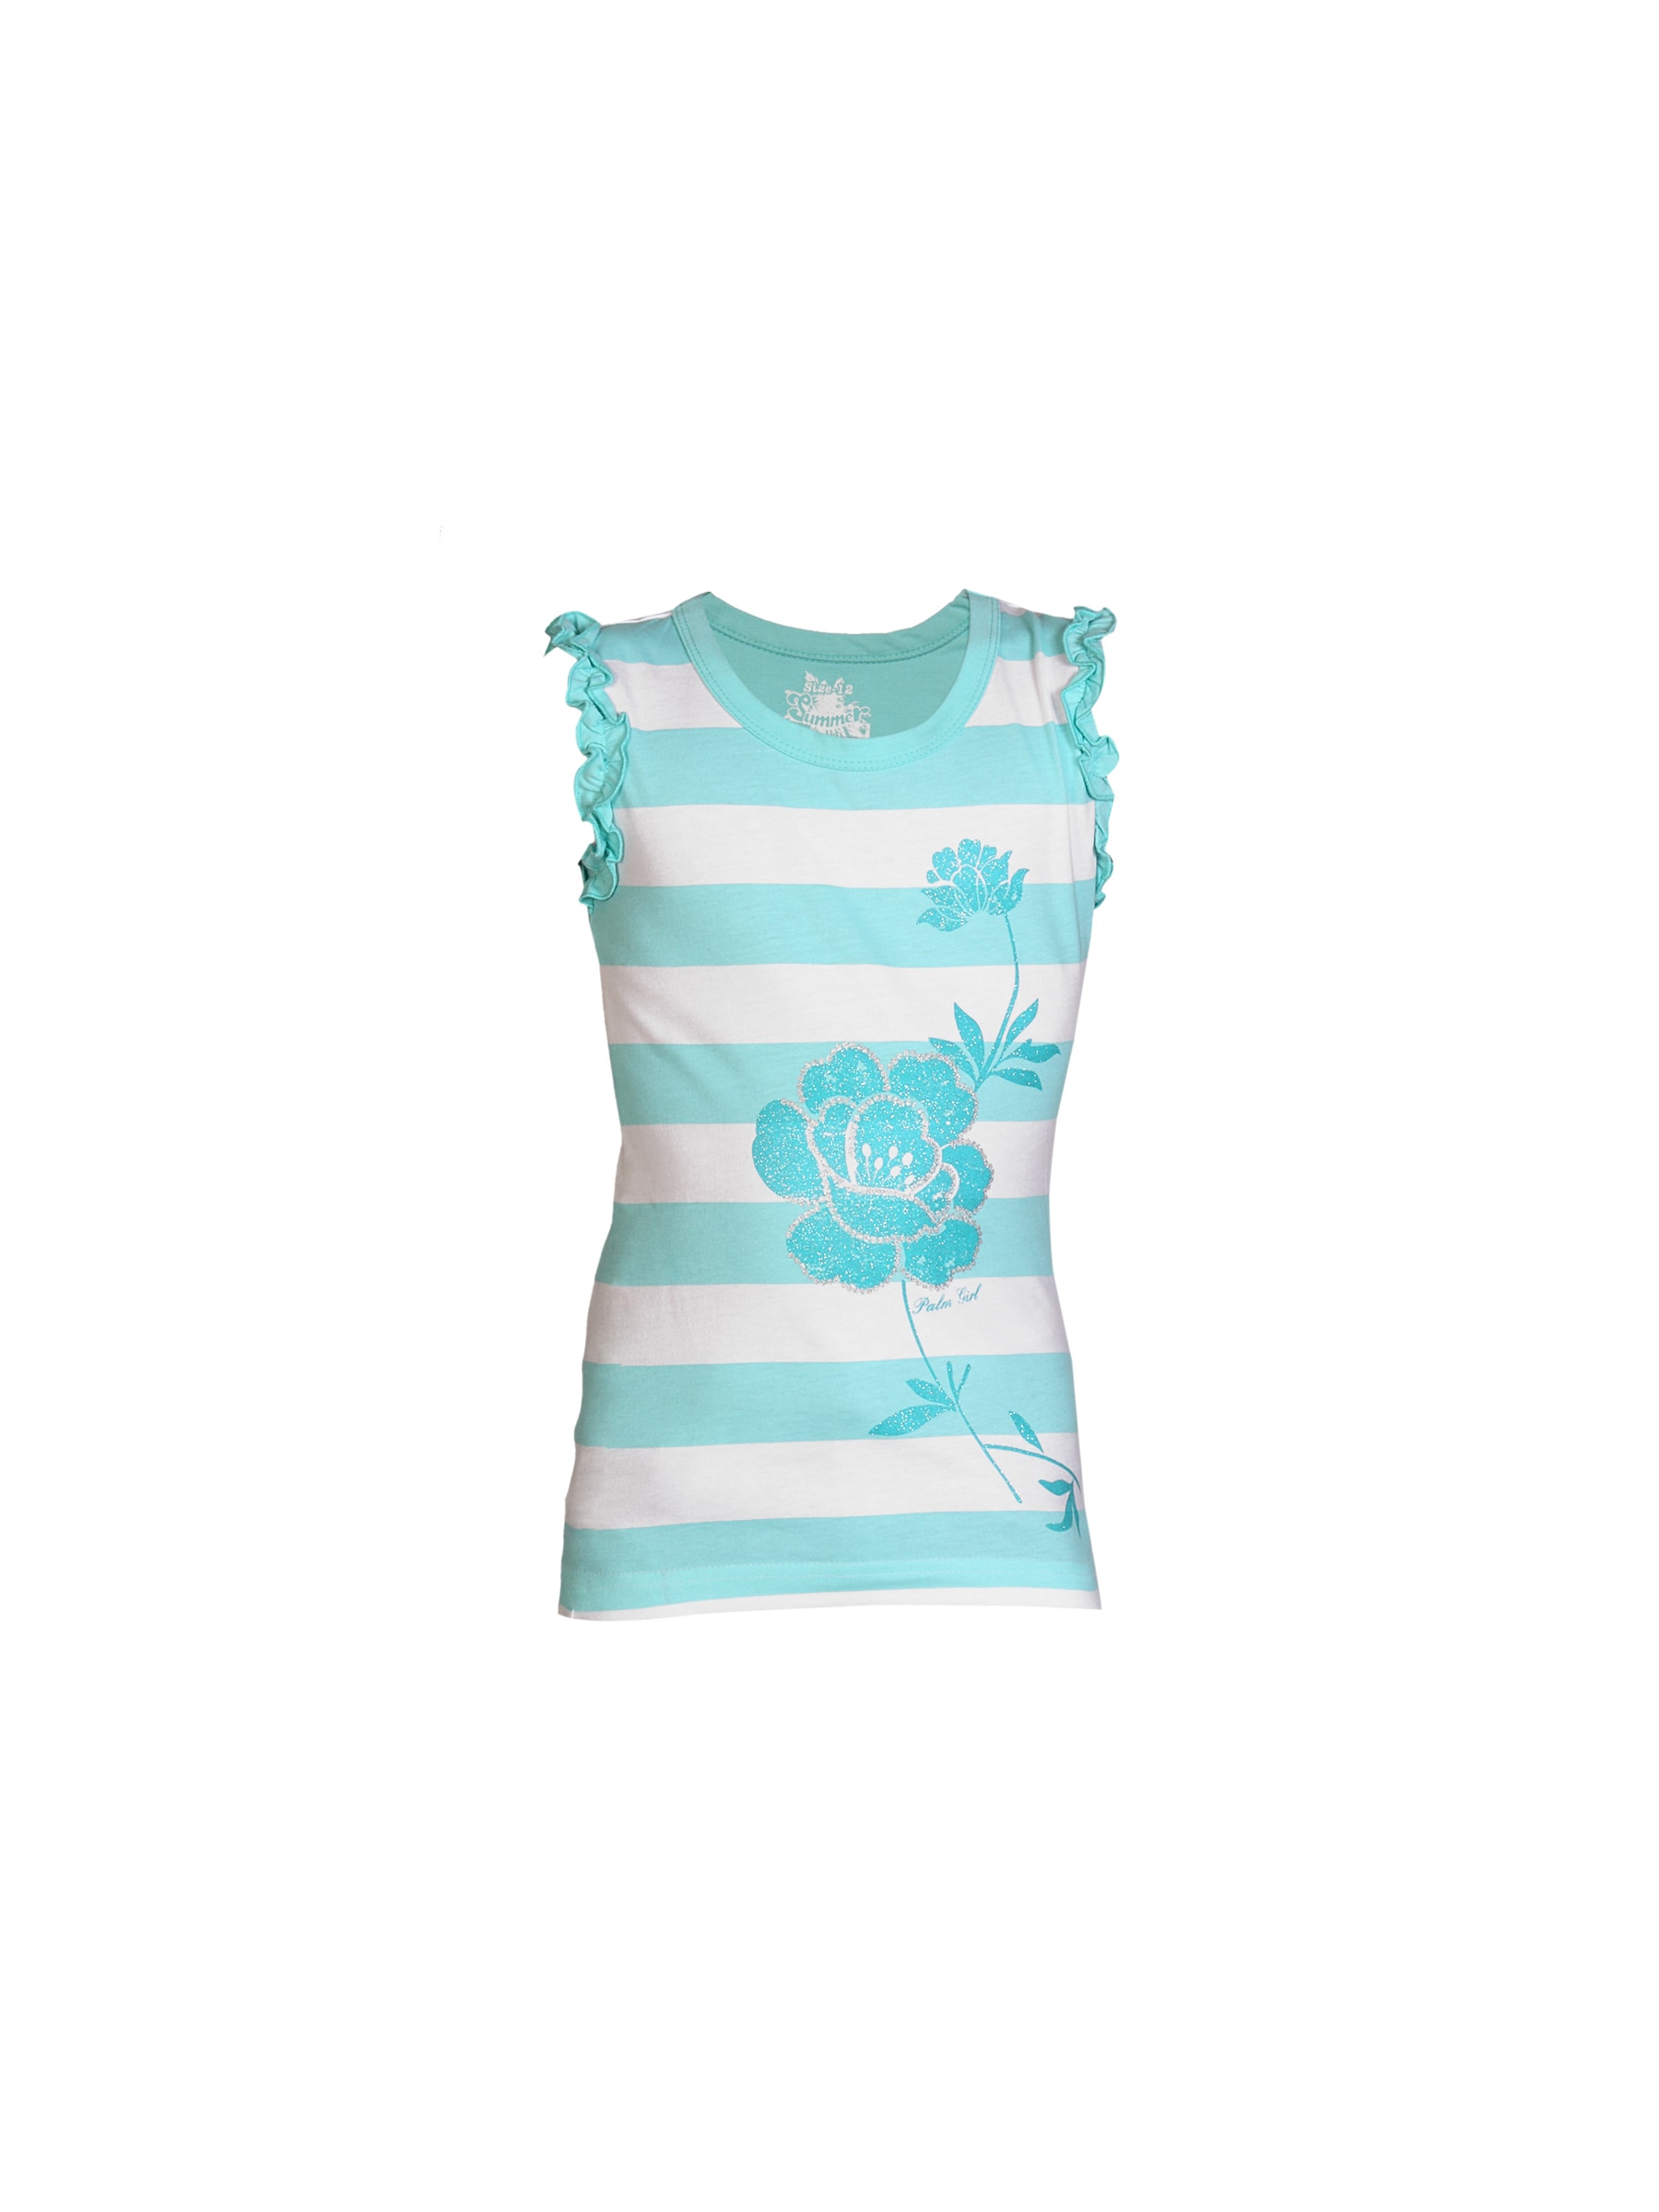 Gini and Jony Girls Summer Up Blue Top